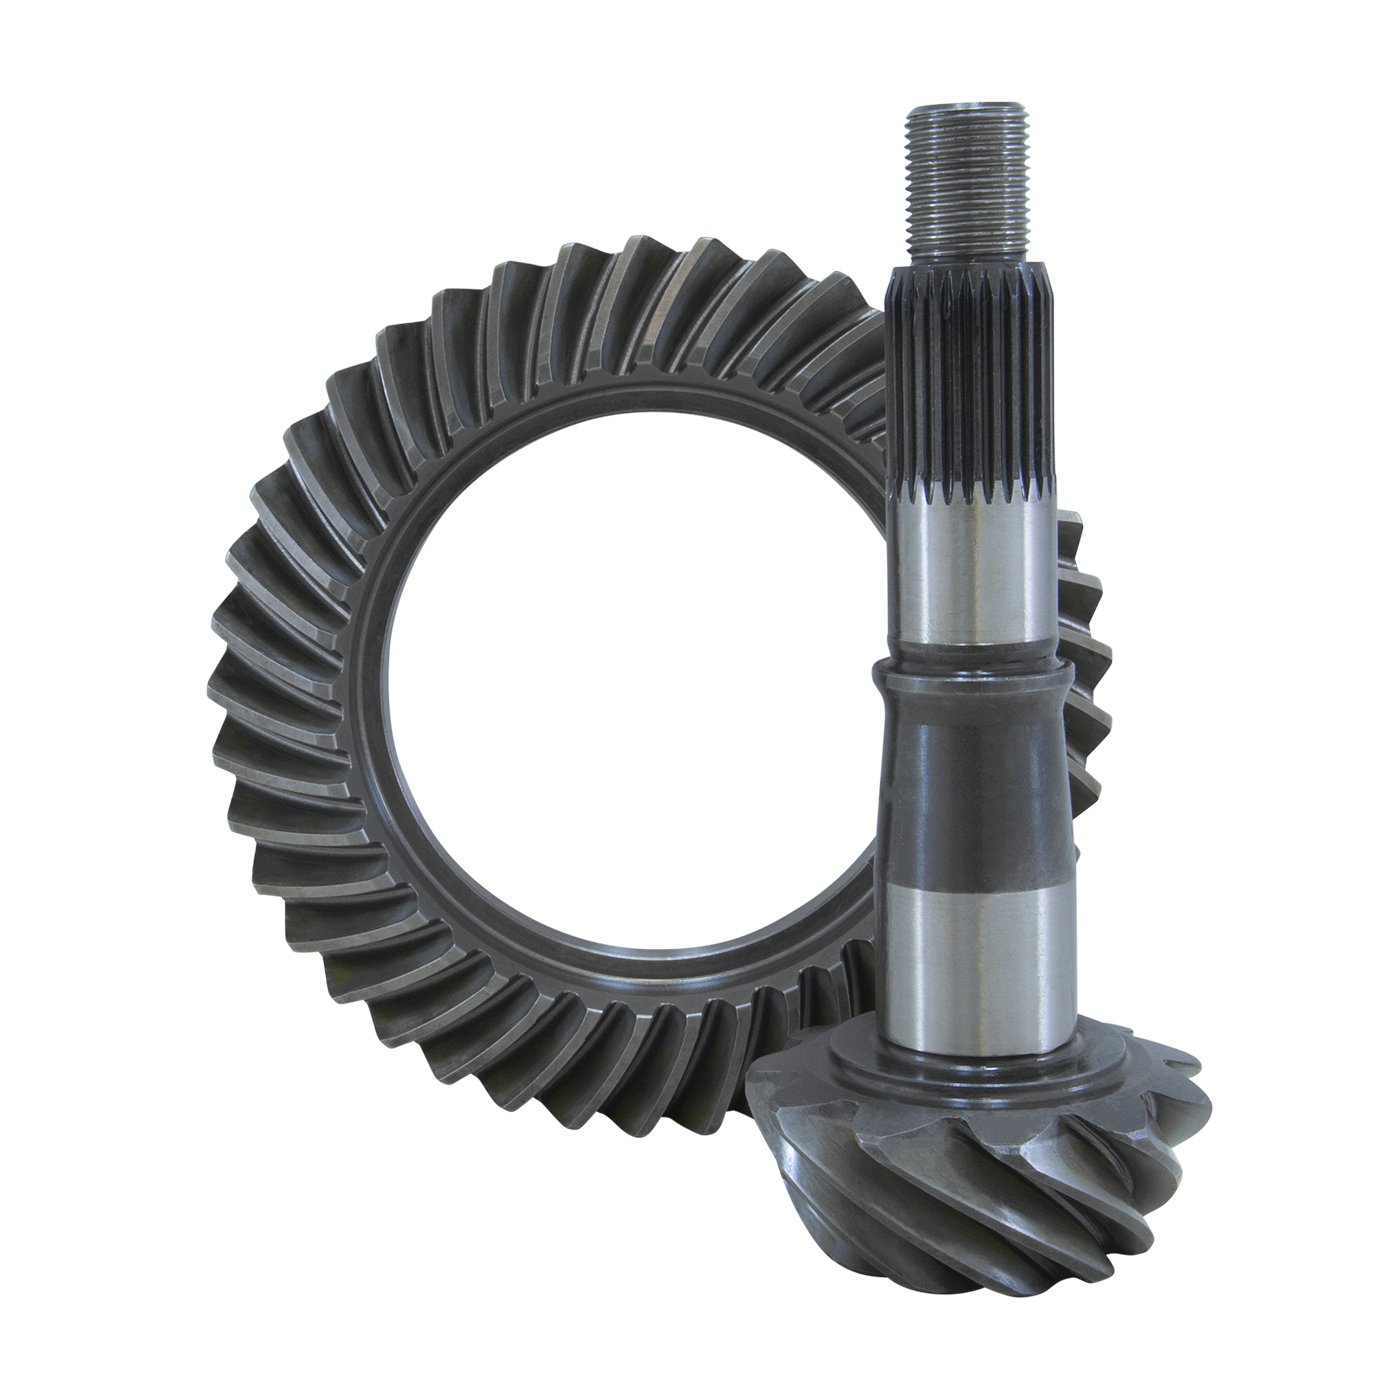 USA Standard 36196 Ring & Pinion in.Thick in. Gear Set, For GM 7.5 in., 3.42 Ratio